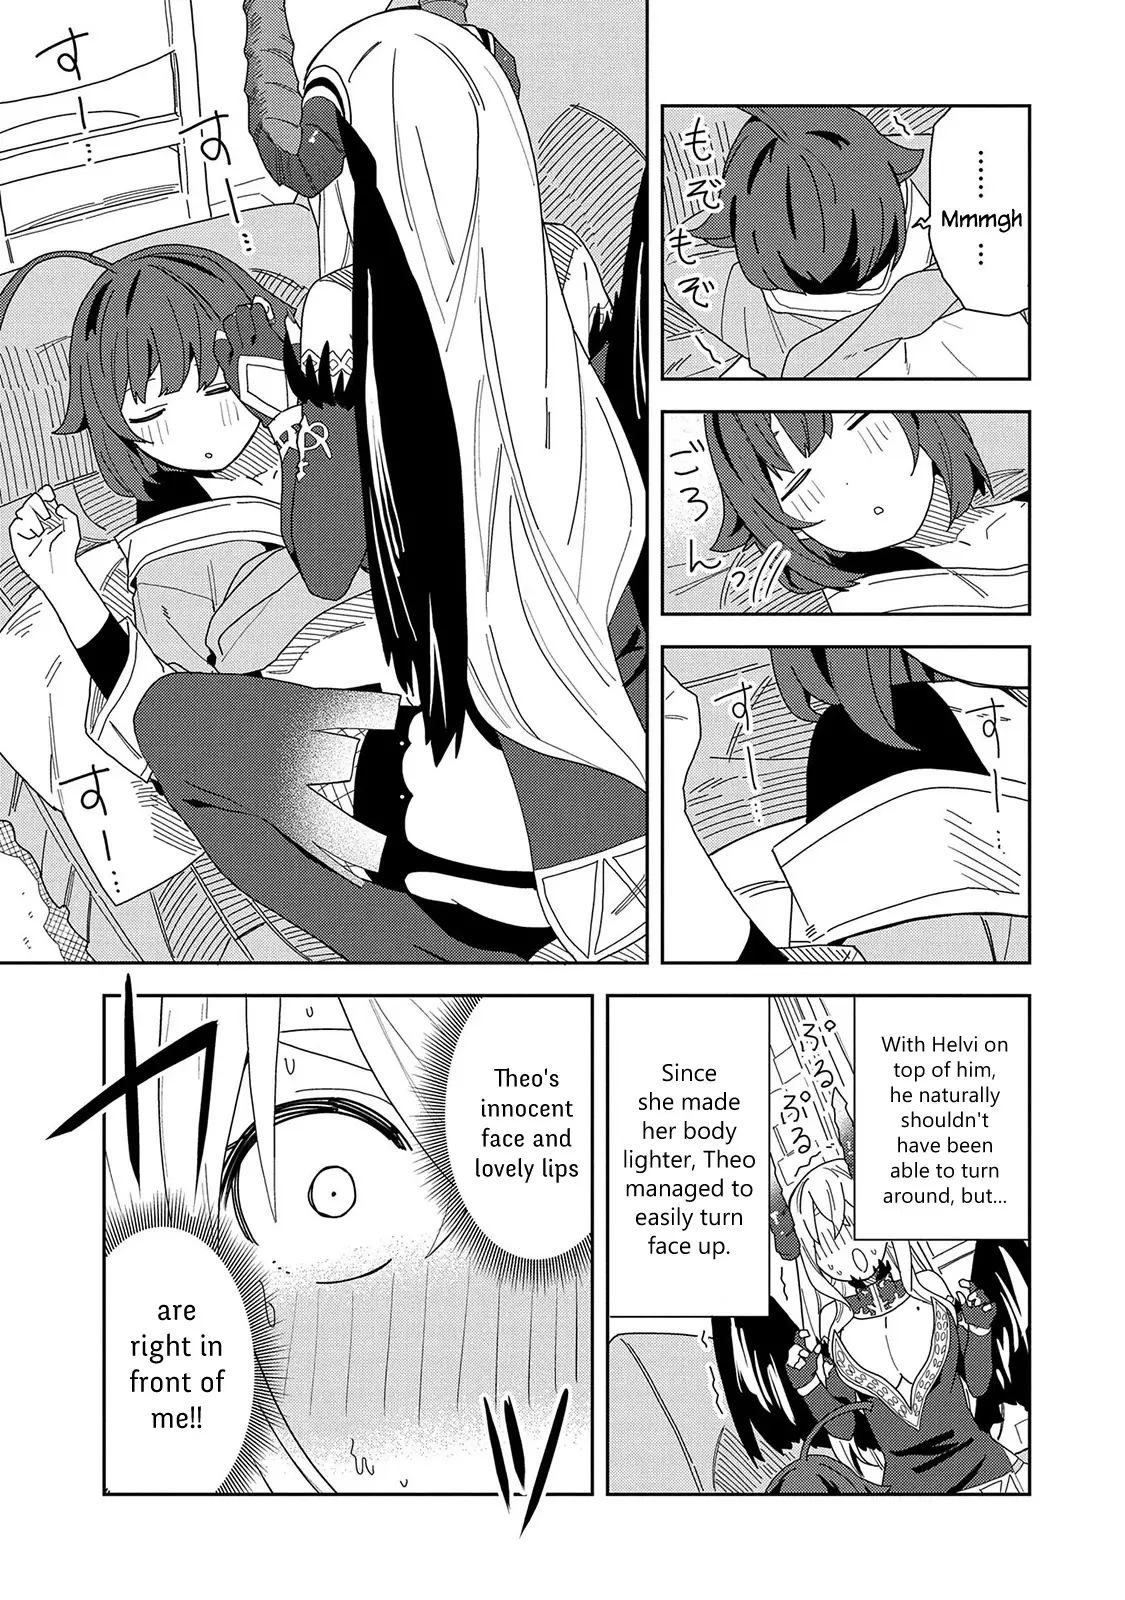 I Summoned The Devil To Grant Me A Wish, But I Married Her Instead Since She Was Adorable ~My New Devil Wife~ - 6 page 9